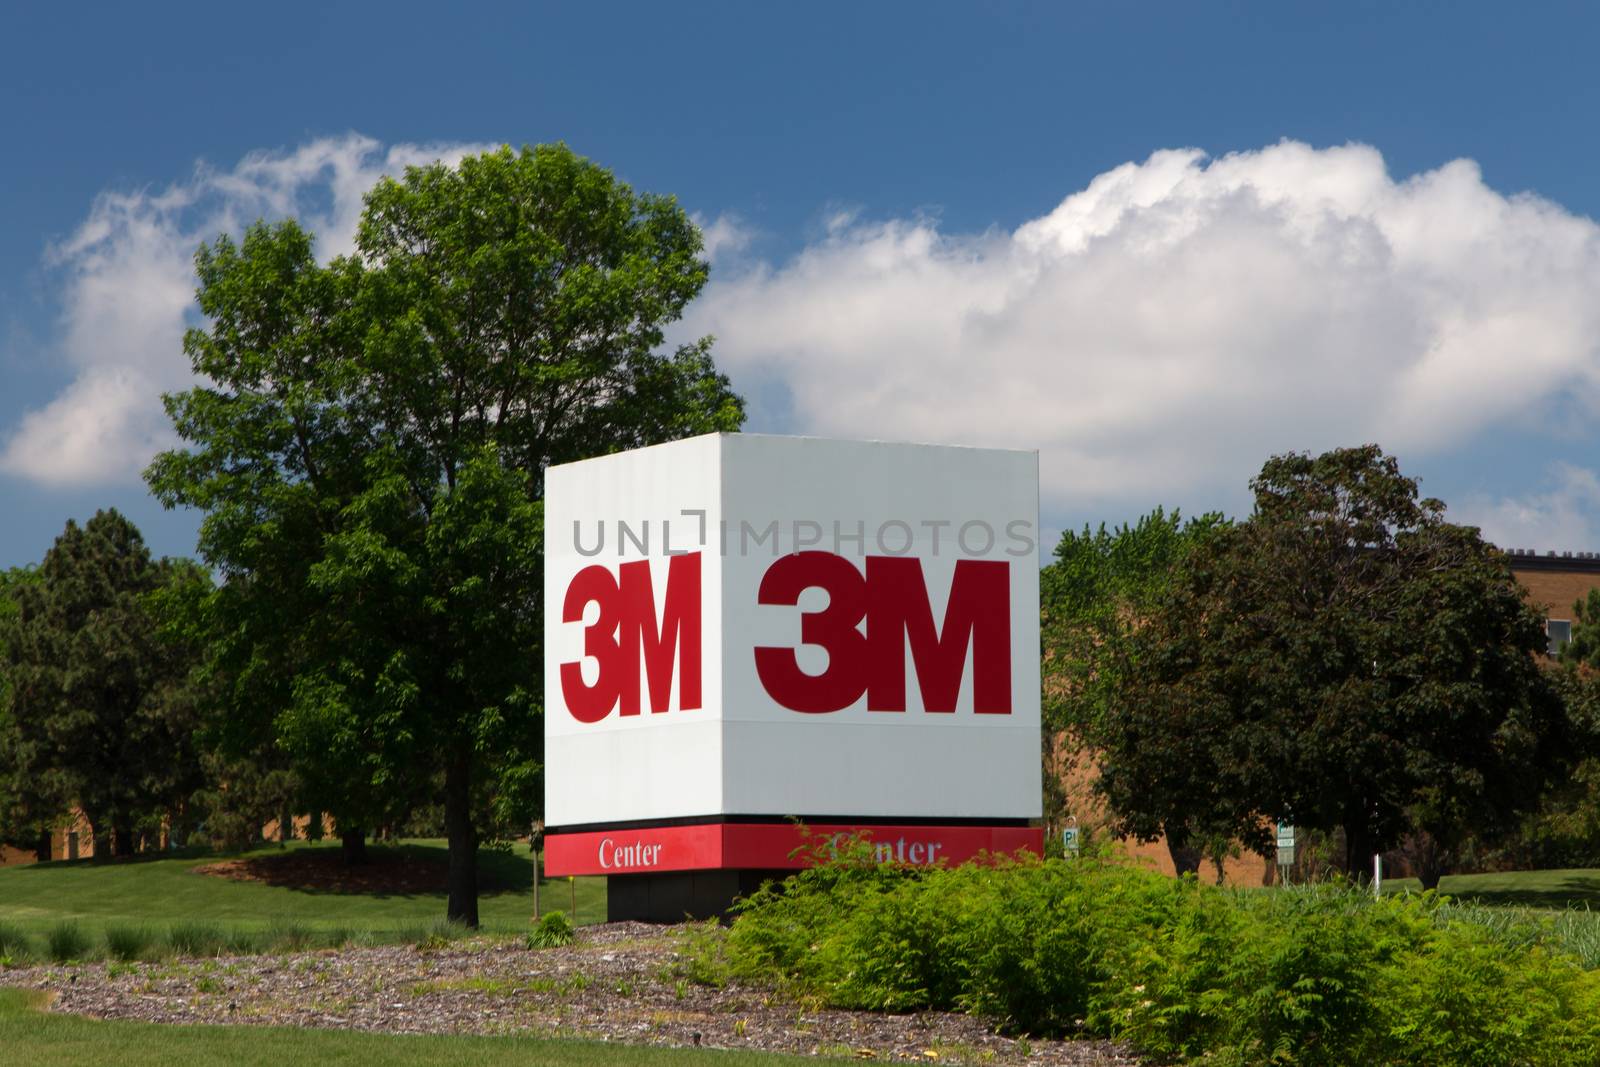 3M Corporate Headquarters Building by wolterk